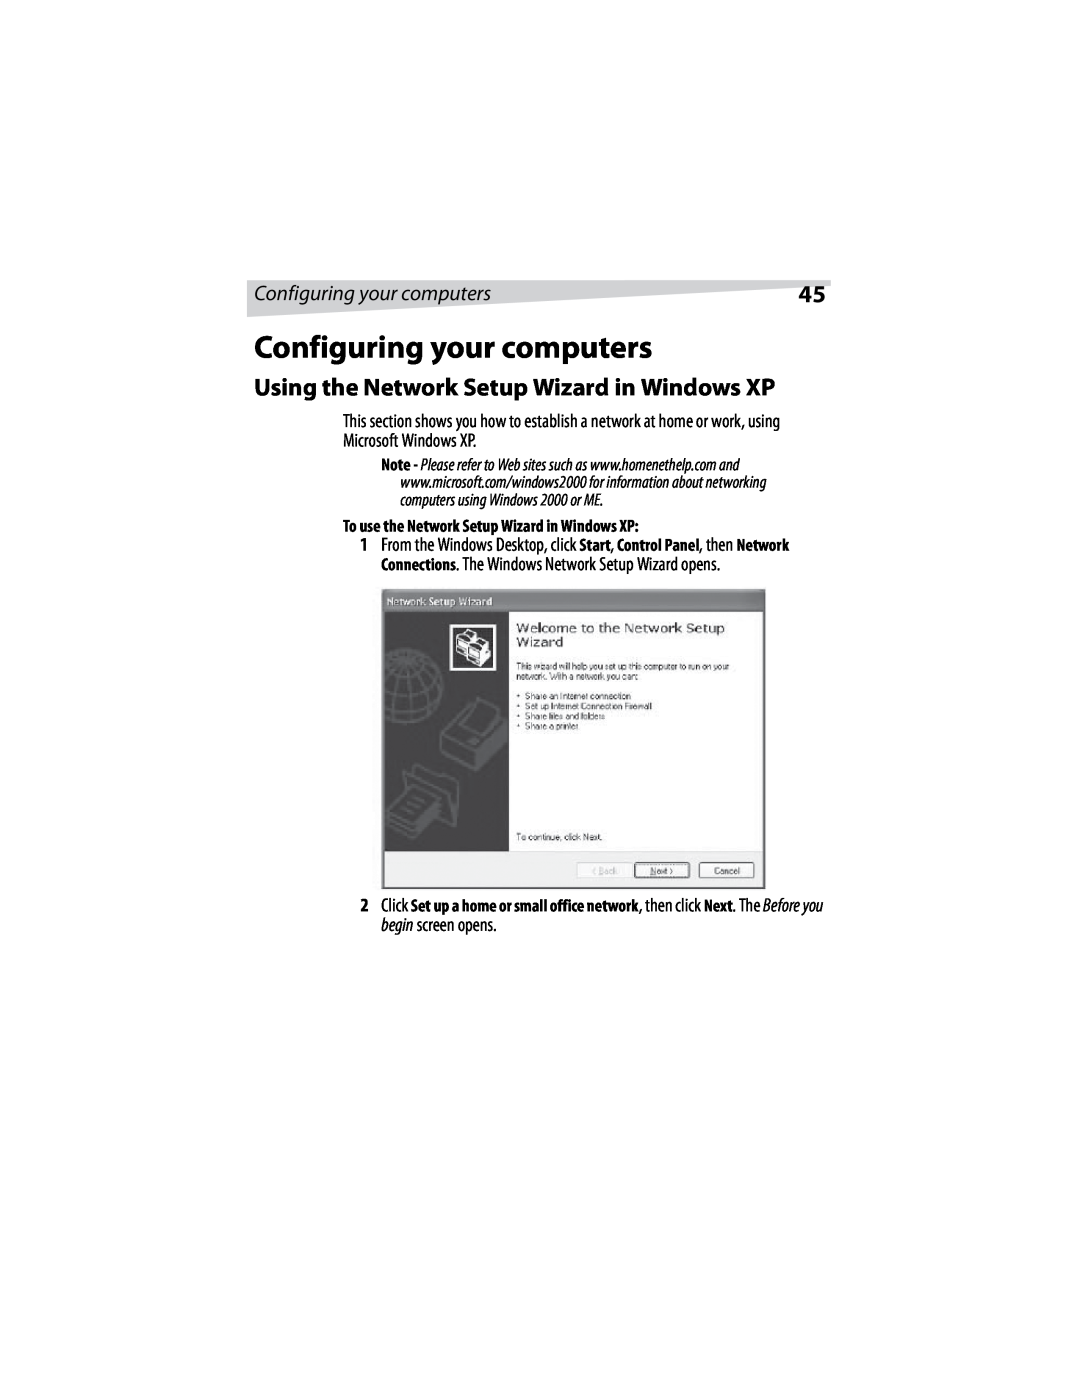 Dynex DX-E401 manual Configuring your computers, Using the Network Setup Wizard in Windows XP 